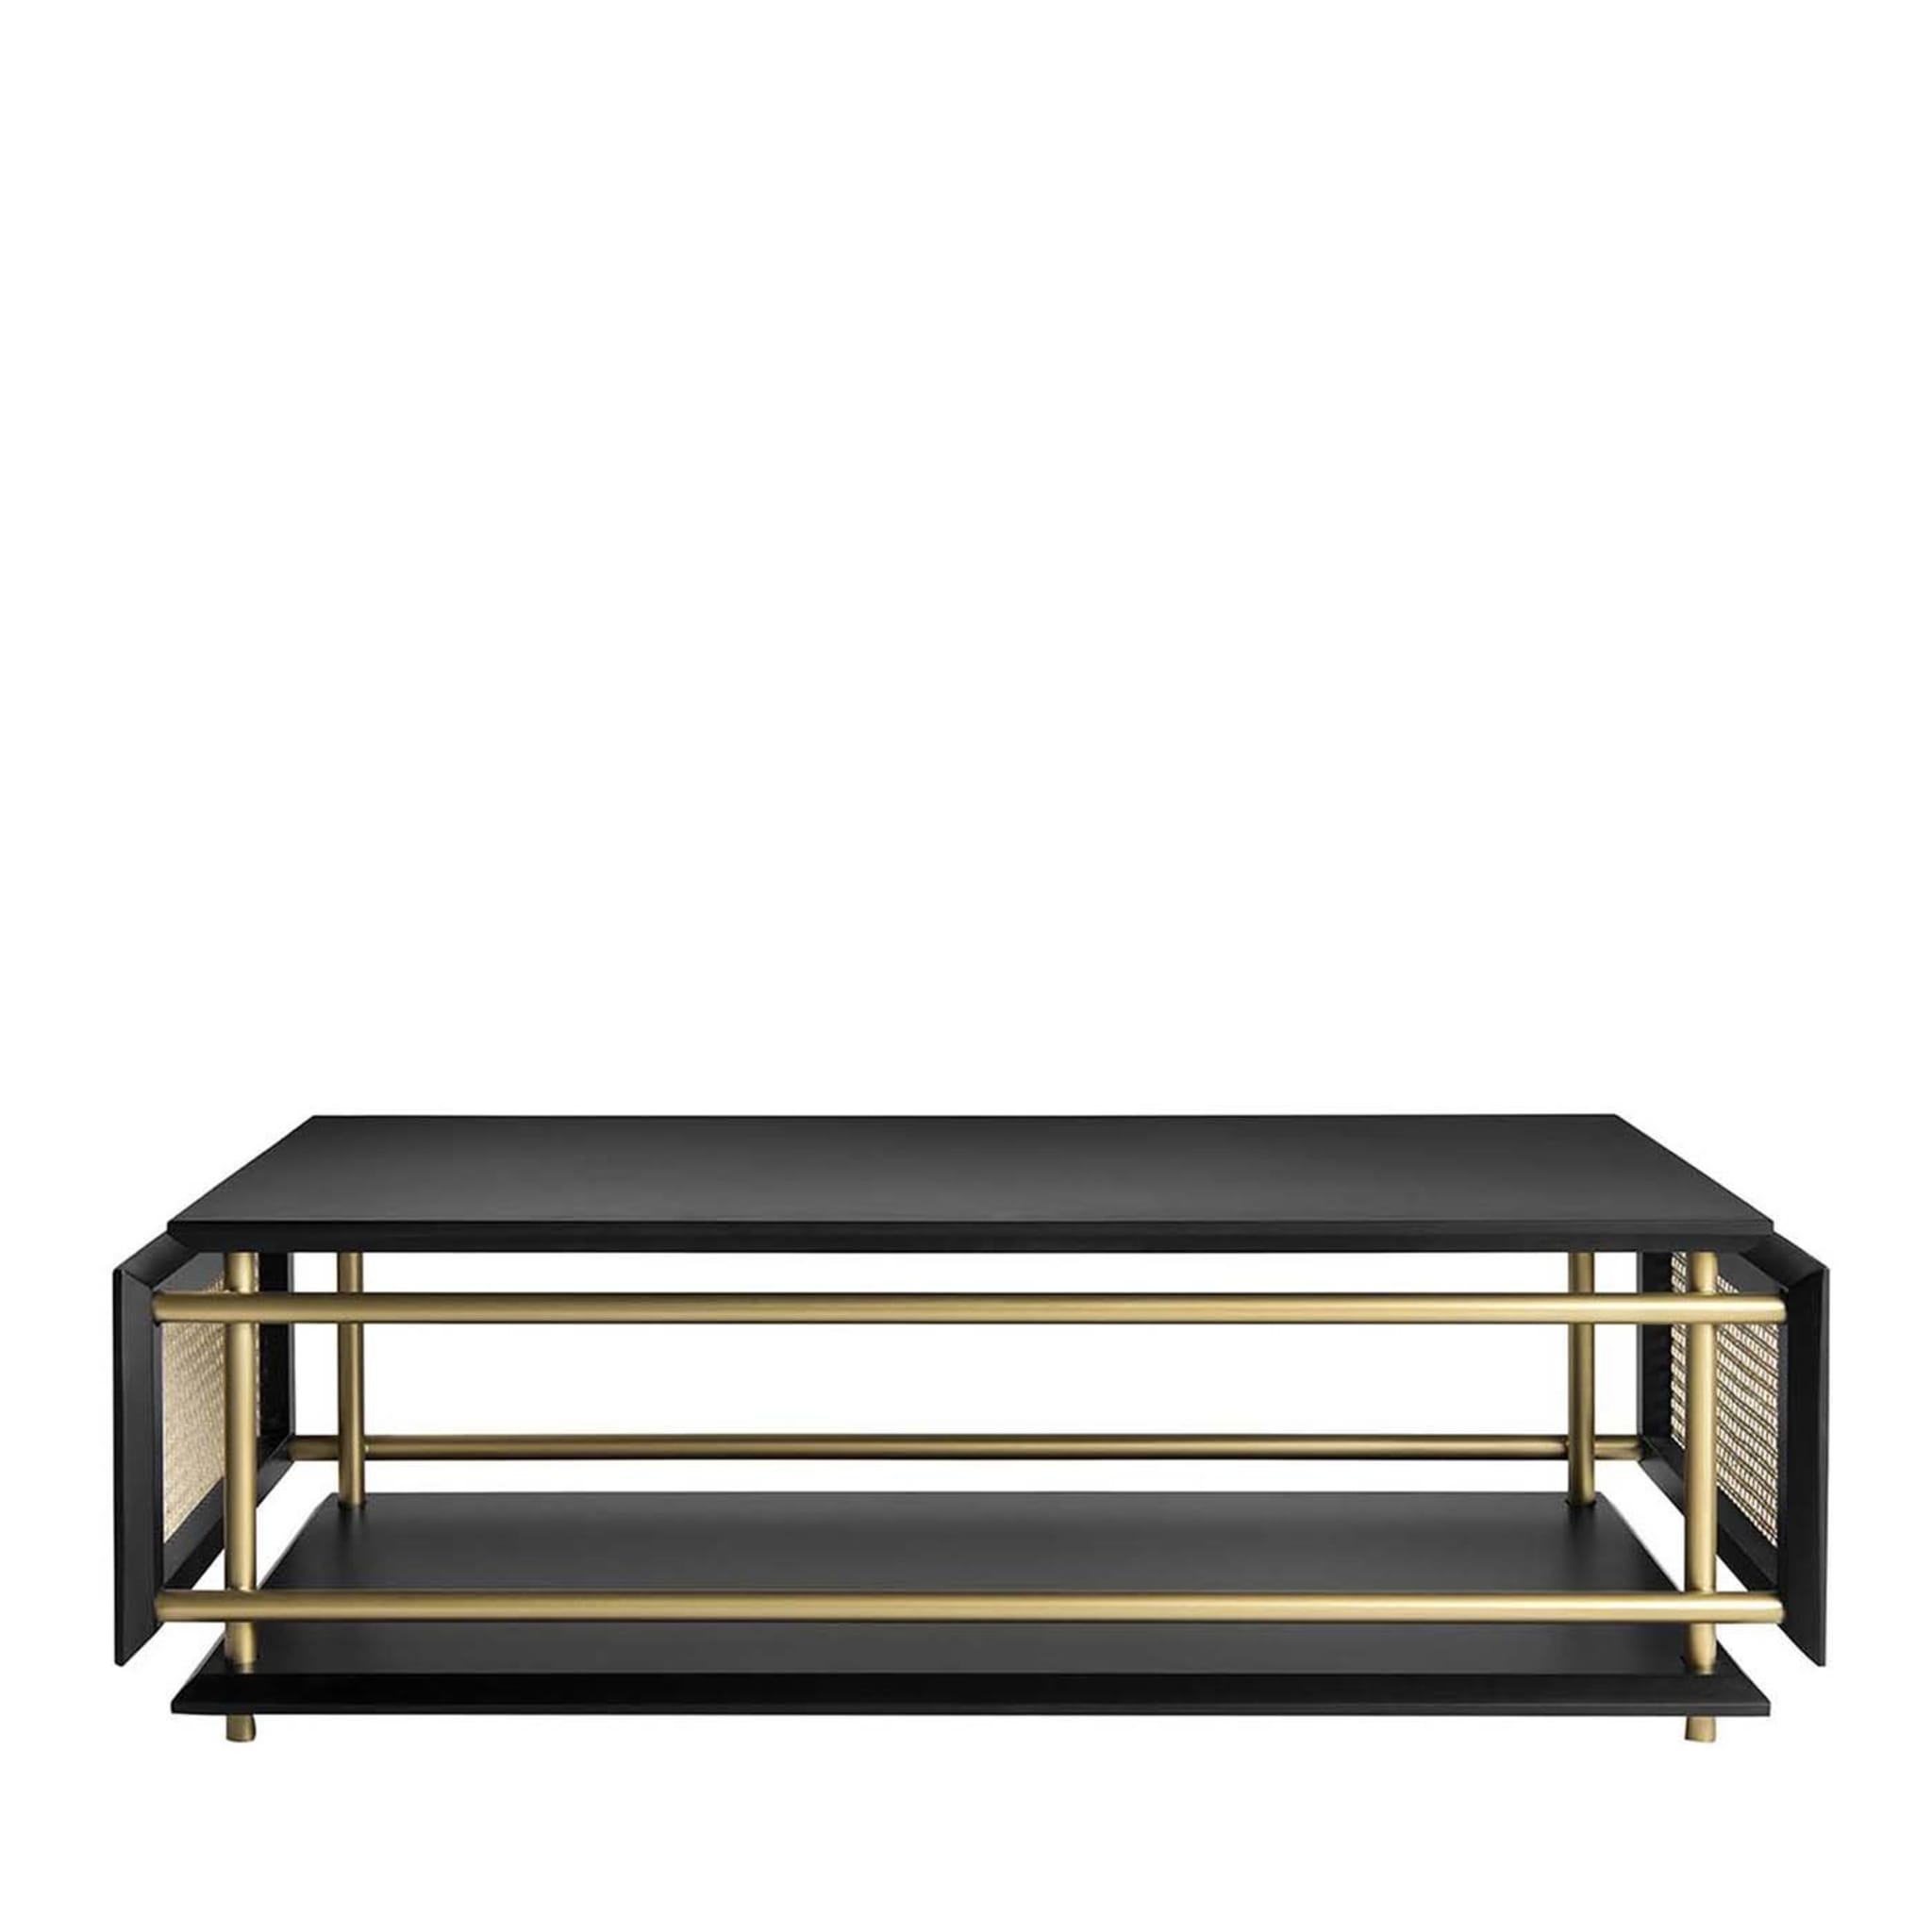 Wiener Box Coffee Table by Cristian Mohaded - Main view